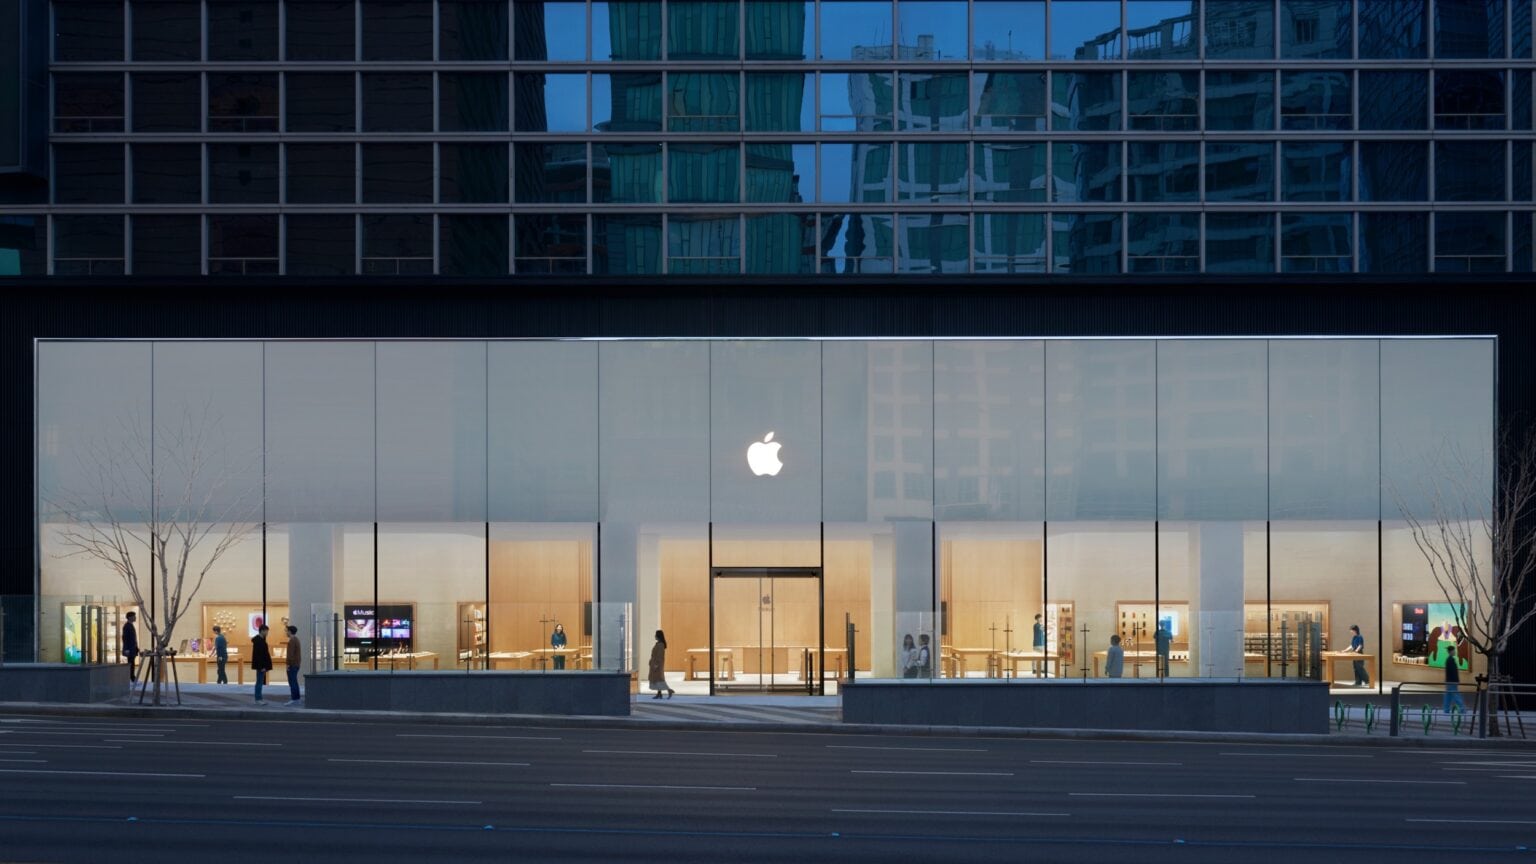 The distinctive glass facade of the new Apple Gangnam store in Seoul, South Korea.